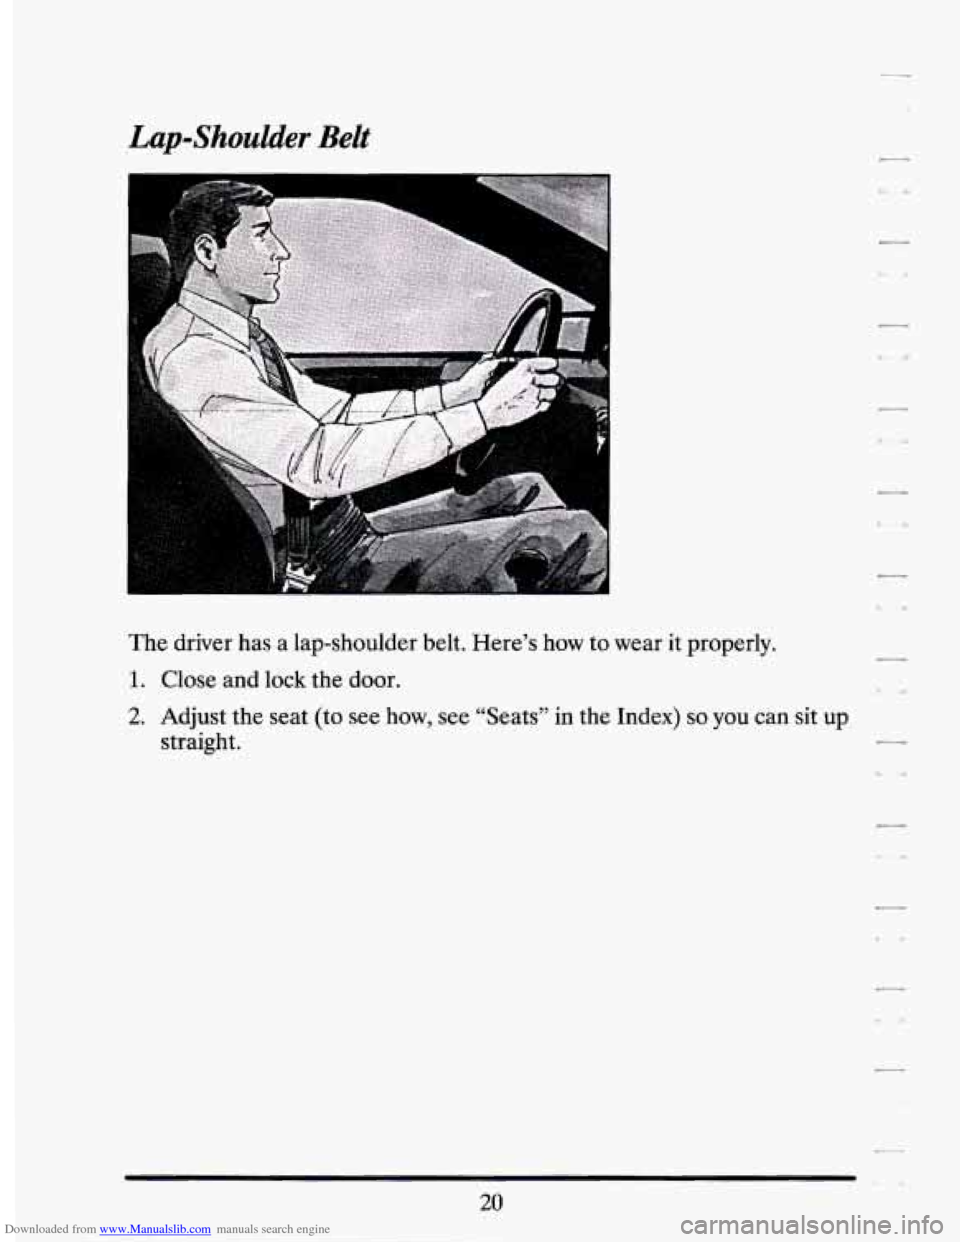 CADILLAC SEVILLE 1994 4.G Owners Manual Downloaded from www.Manualslib.com manuals search engine Lawshoulder Belt 
I 
The driver  has  a lap-shoulder  belt.  Here’s  how  to wear  it properly. 
1. Close  and  lock  the door. 
2. Adjust th